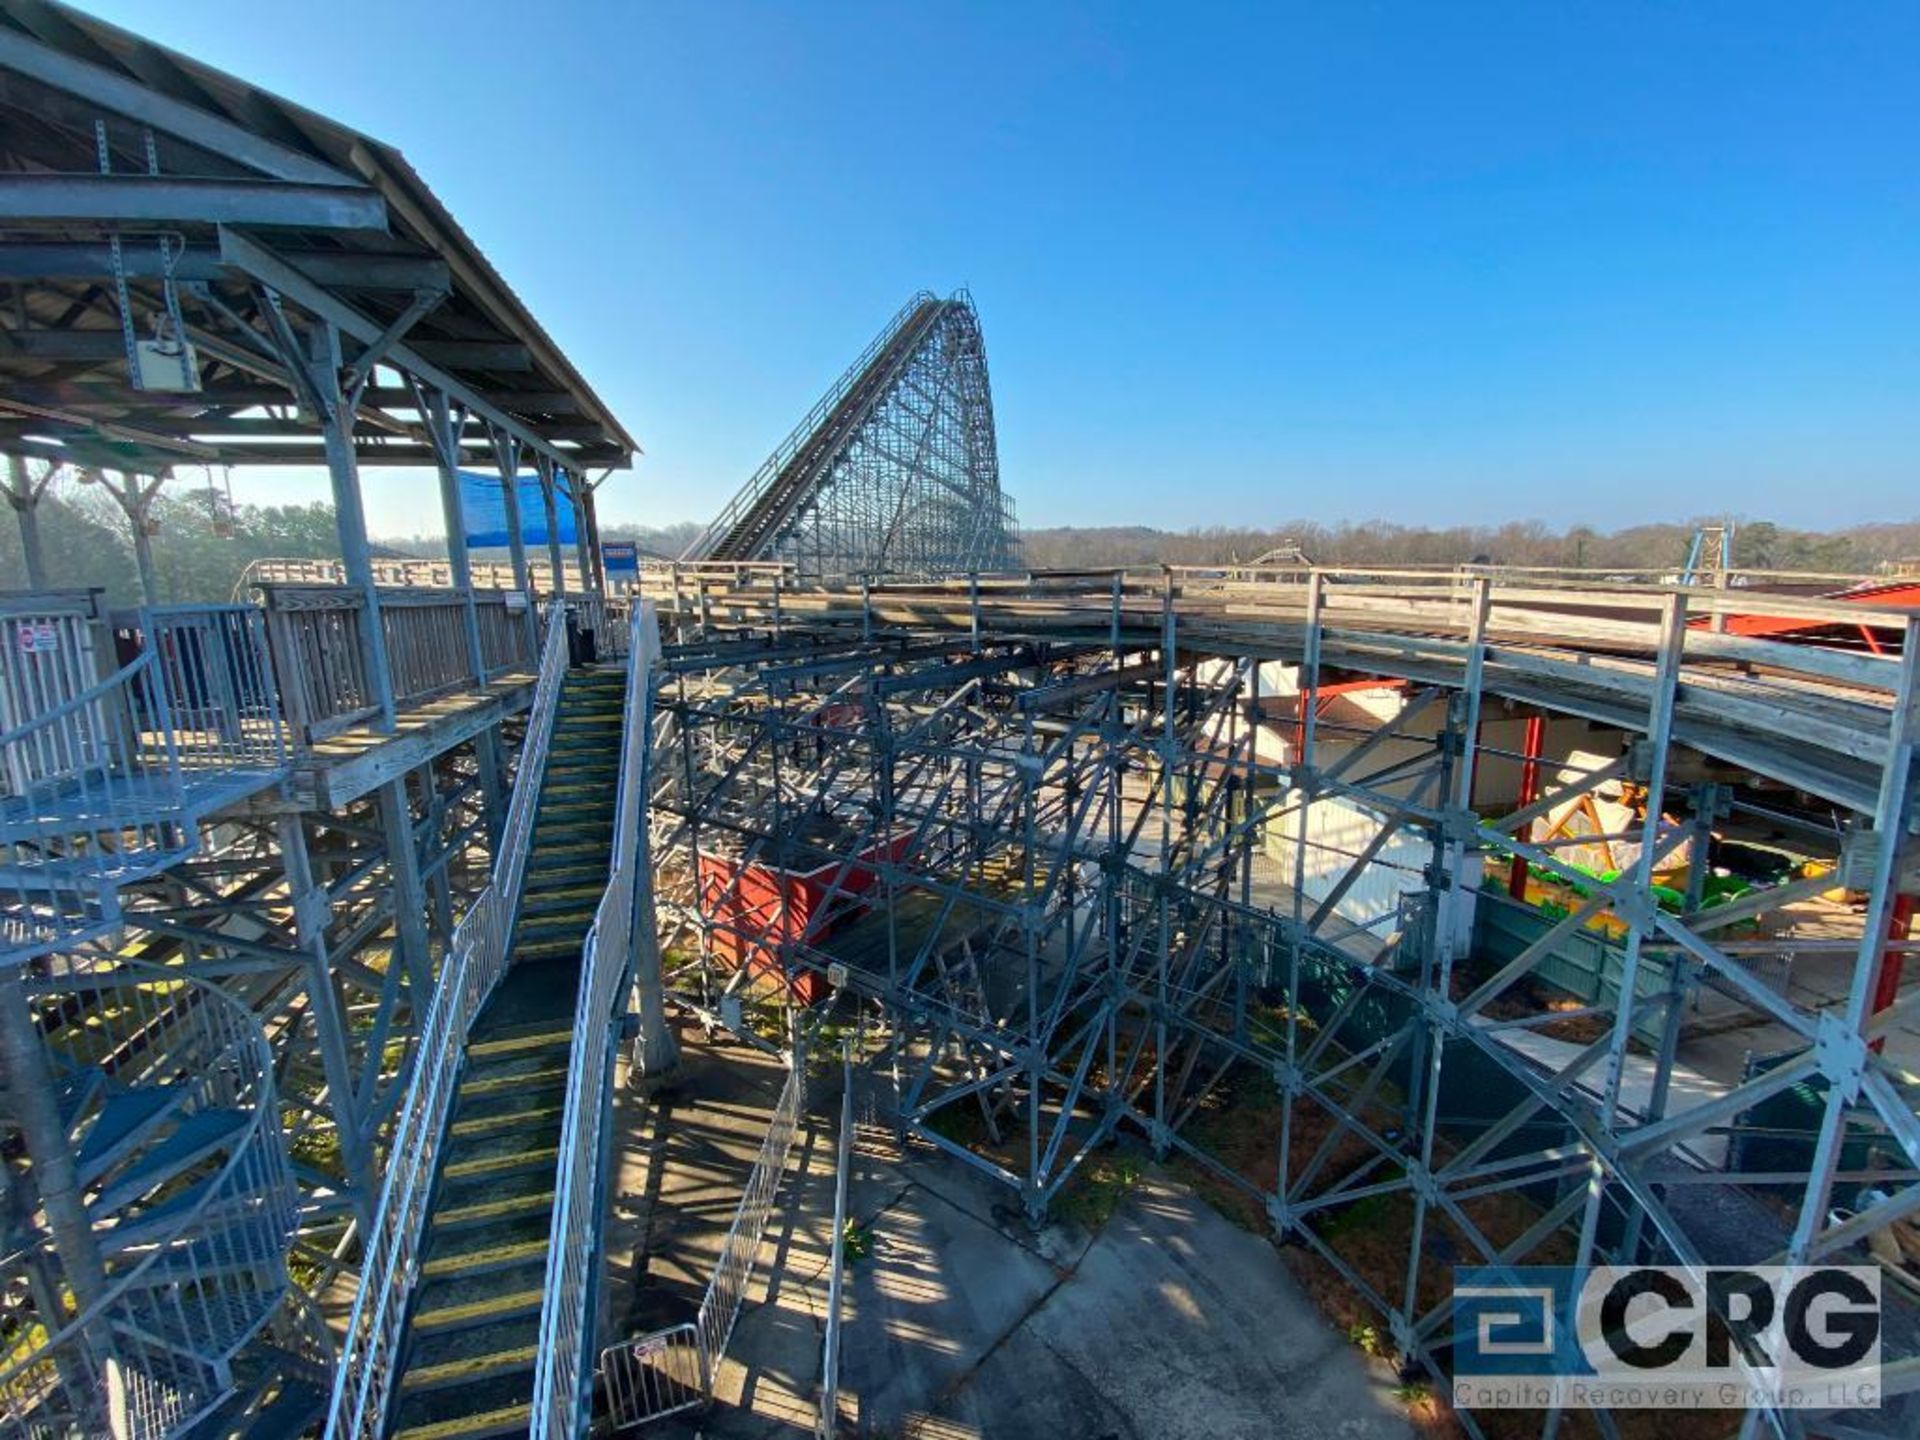 Hell Cat wood deck roller coaster, all galvanized steel structure frame, new in 2005, including - Image 4 of 9